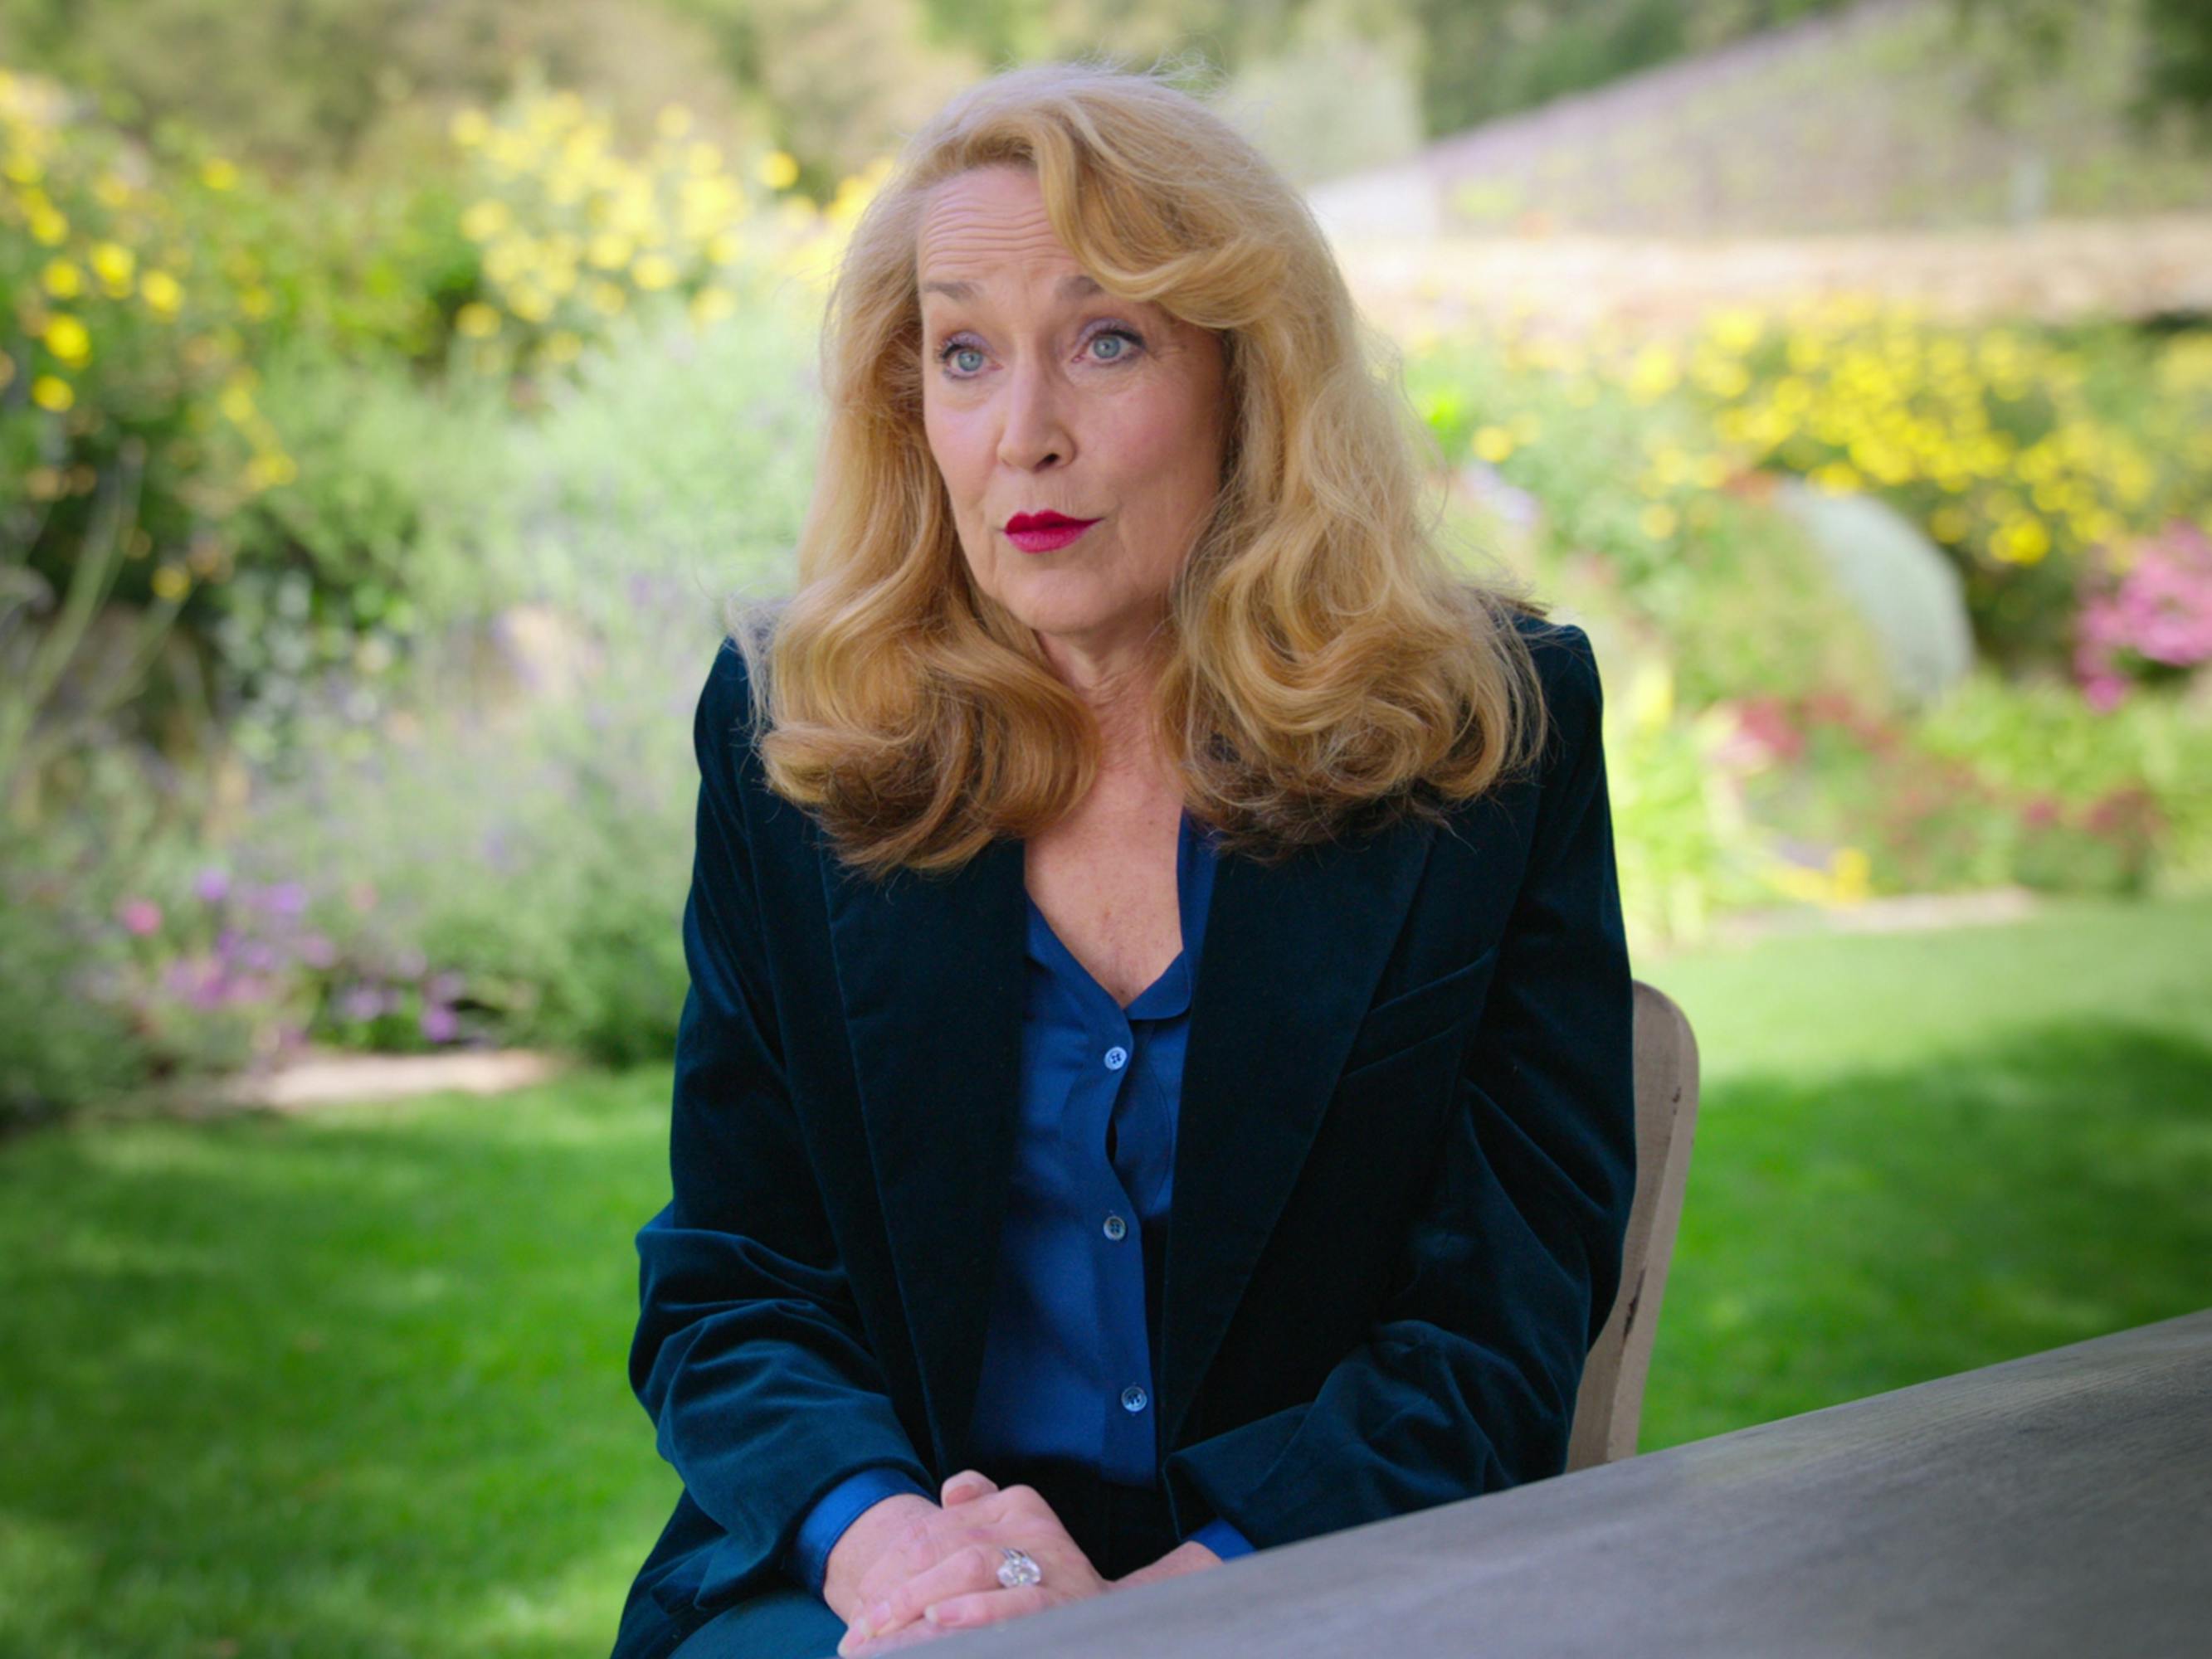 Jerry Hall wears a blue shirt and dark blazer and a bold red lip.